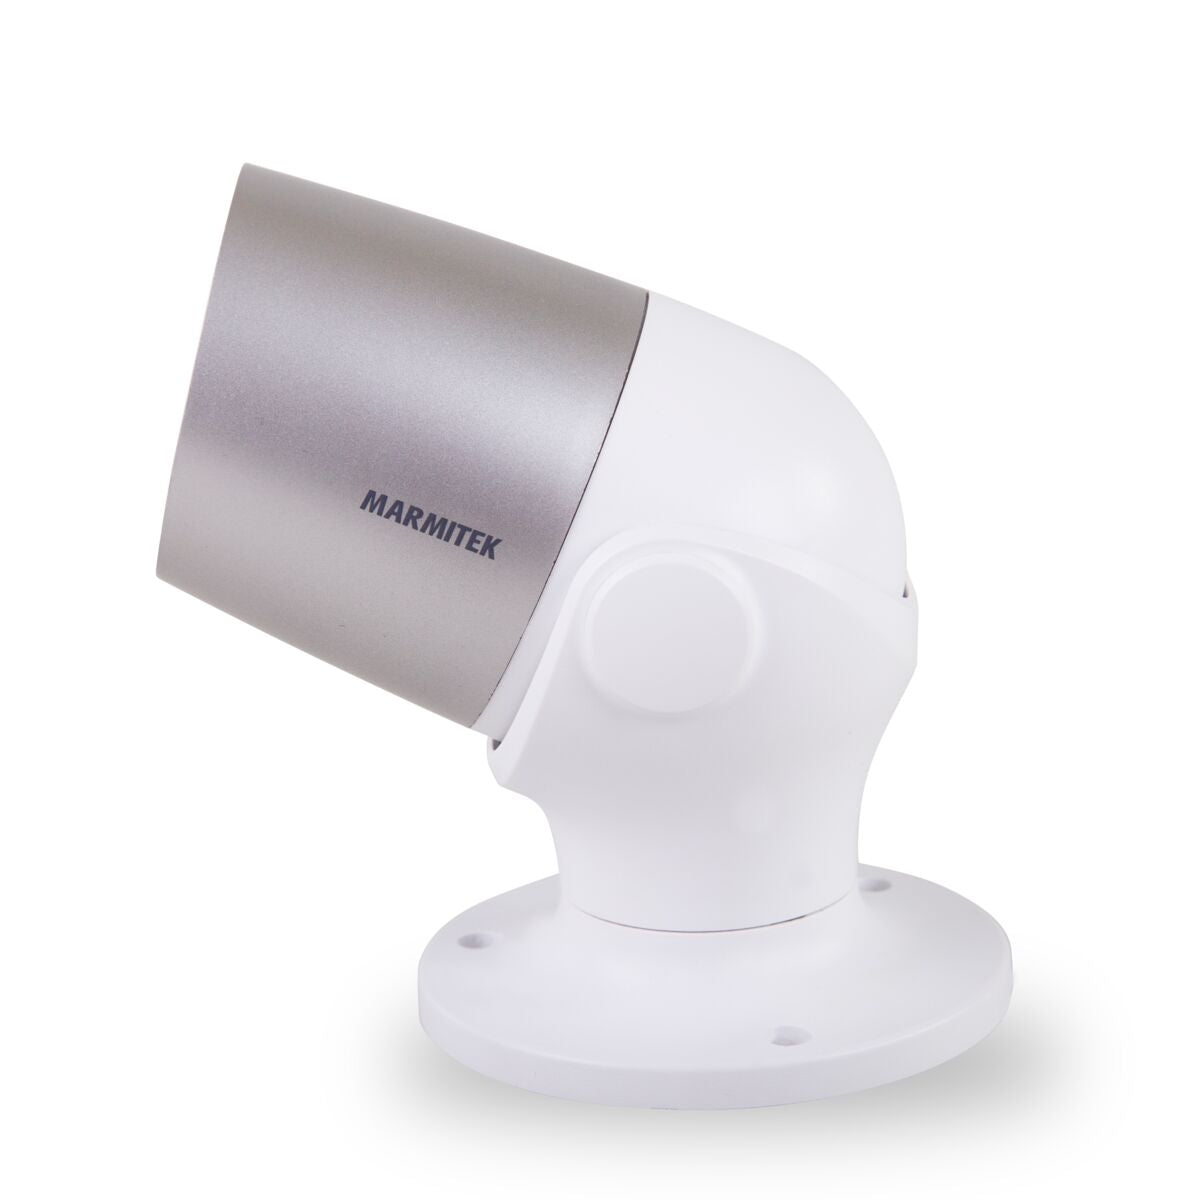 View MO - Wi-Fi camera outdoor - Side View Image | Marmitek